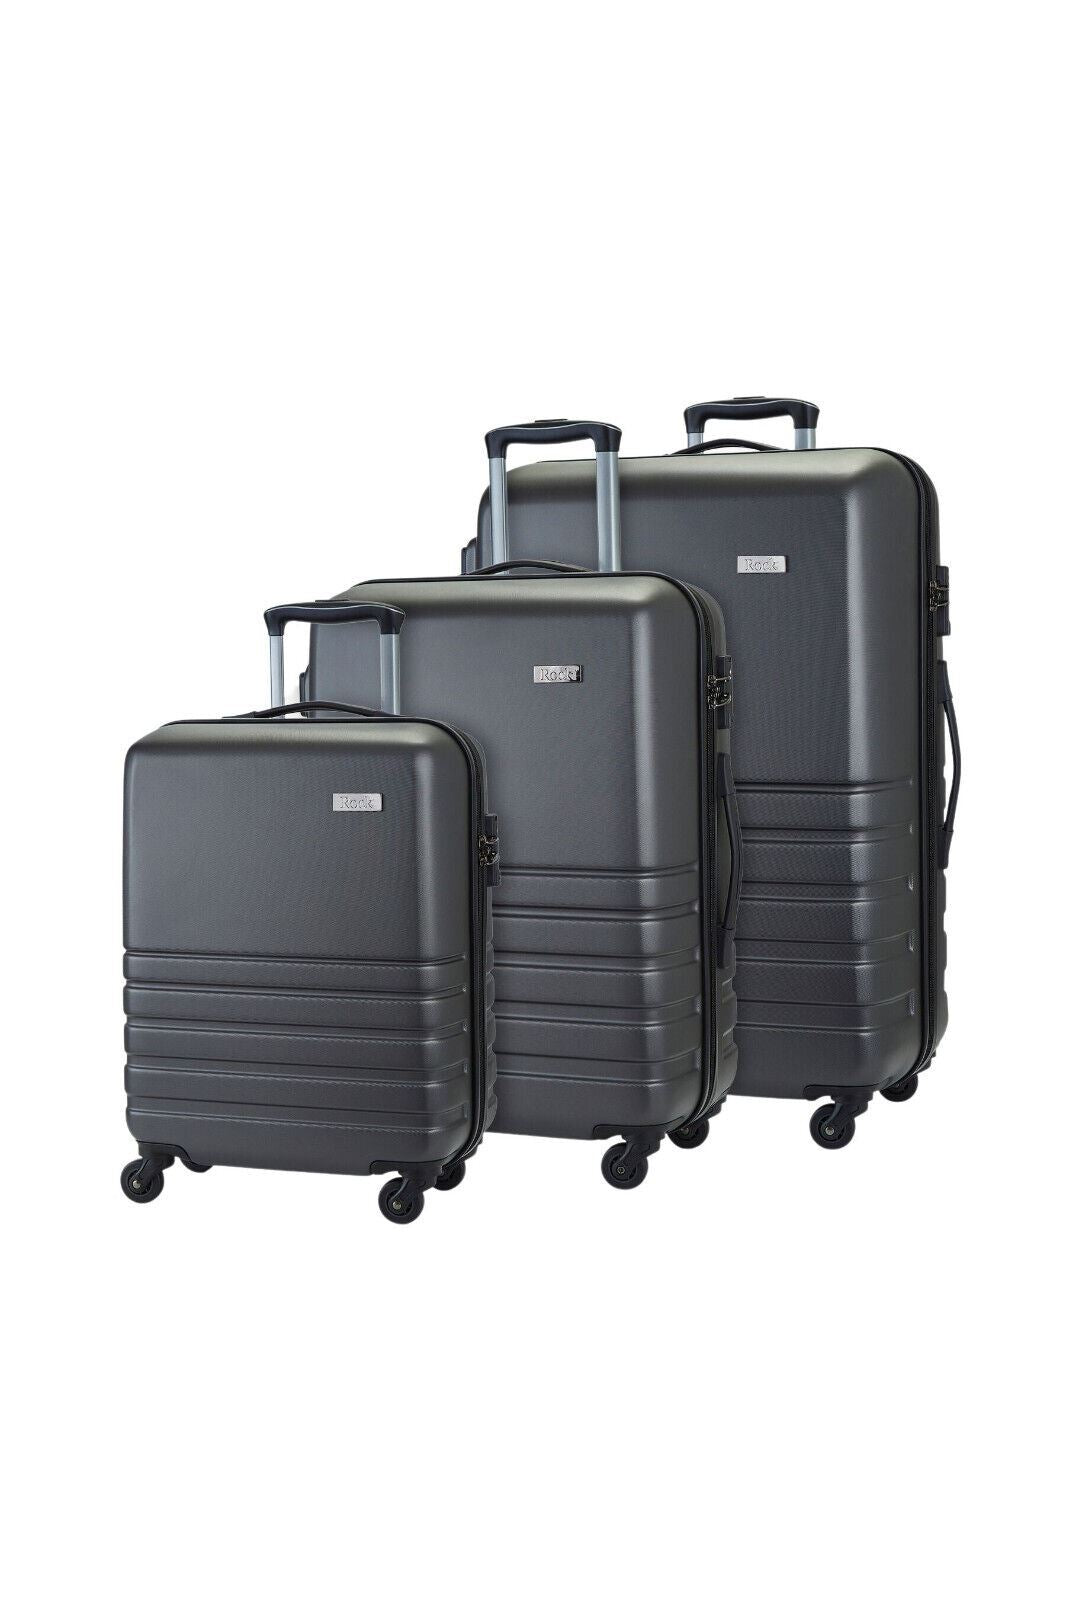 Hard Shell Charcoal Suitcase Set 4 Wheel Cabin Luggage Trolley Travel Bag - Upperclass Fashions 